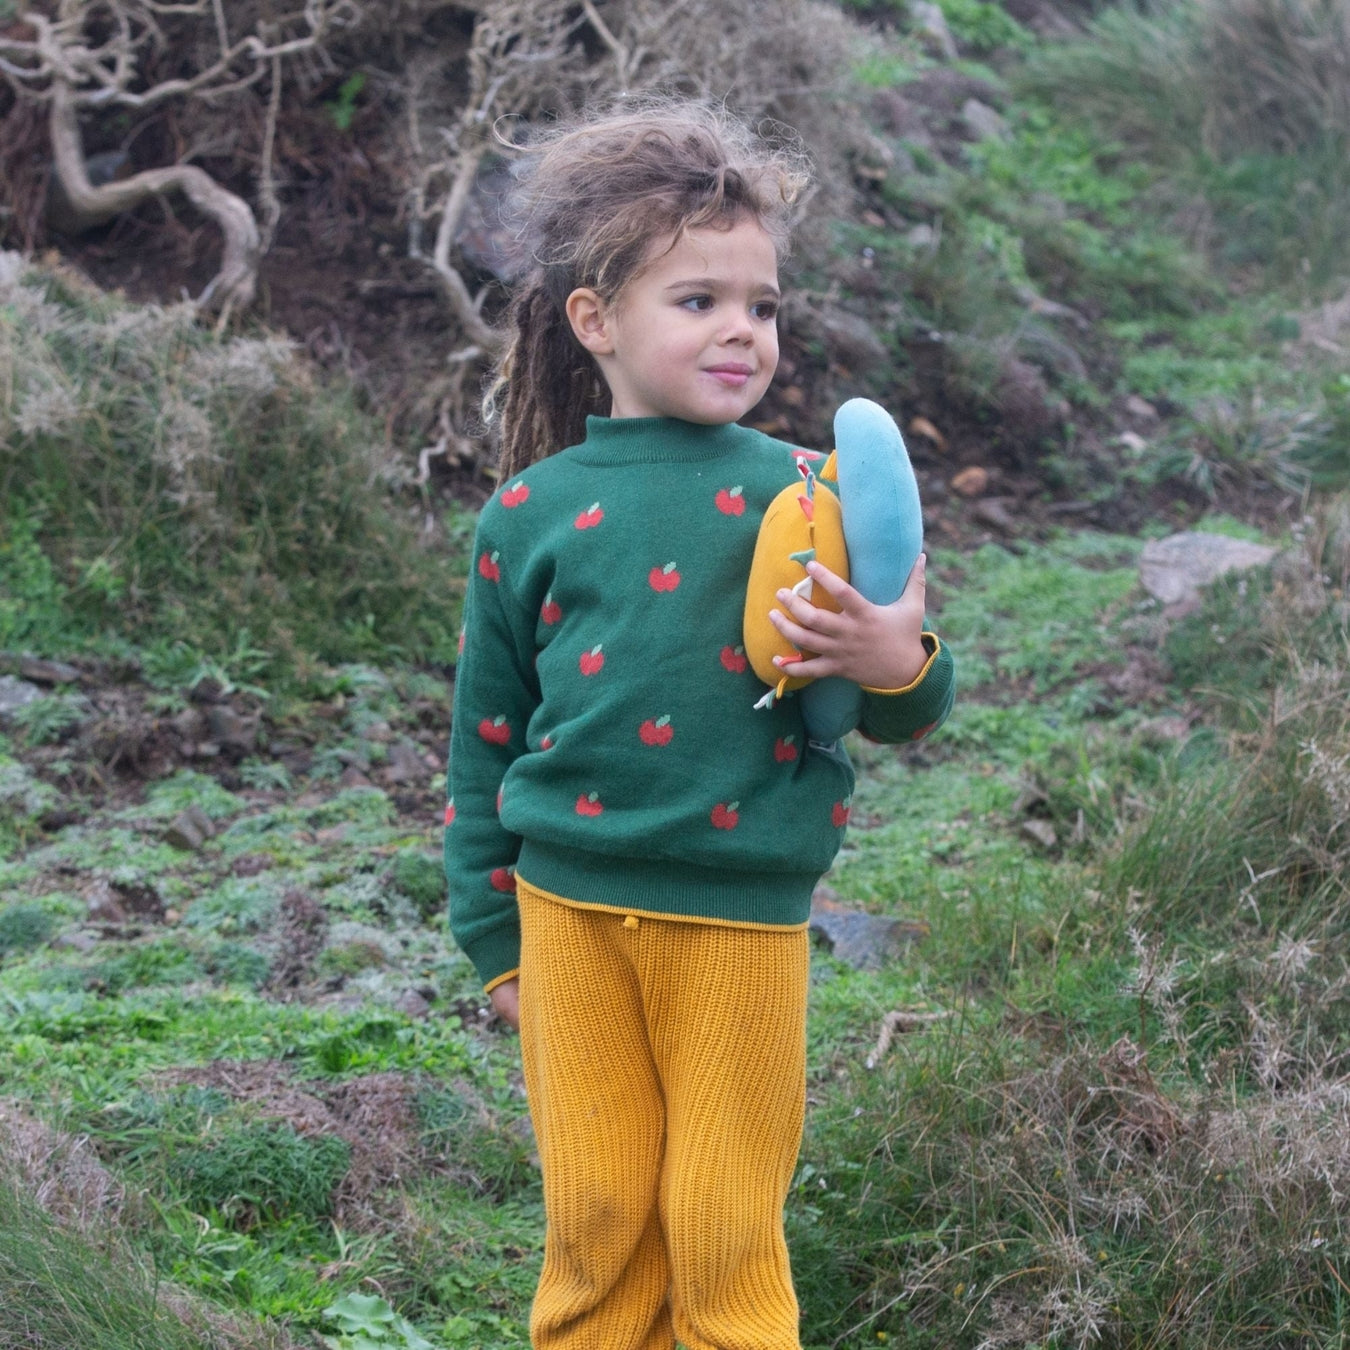 Child out side wearing an apple sweater